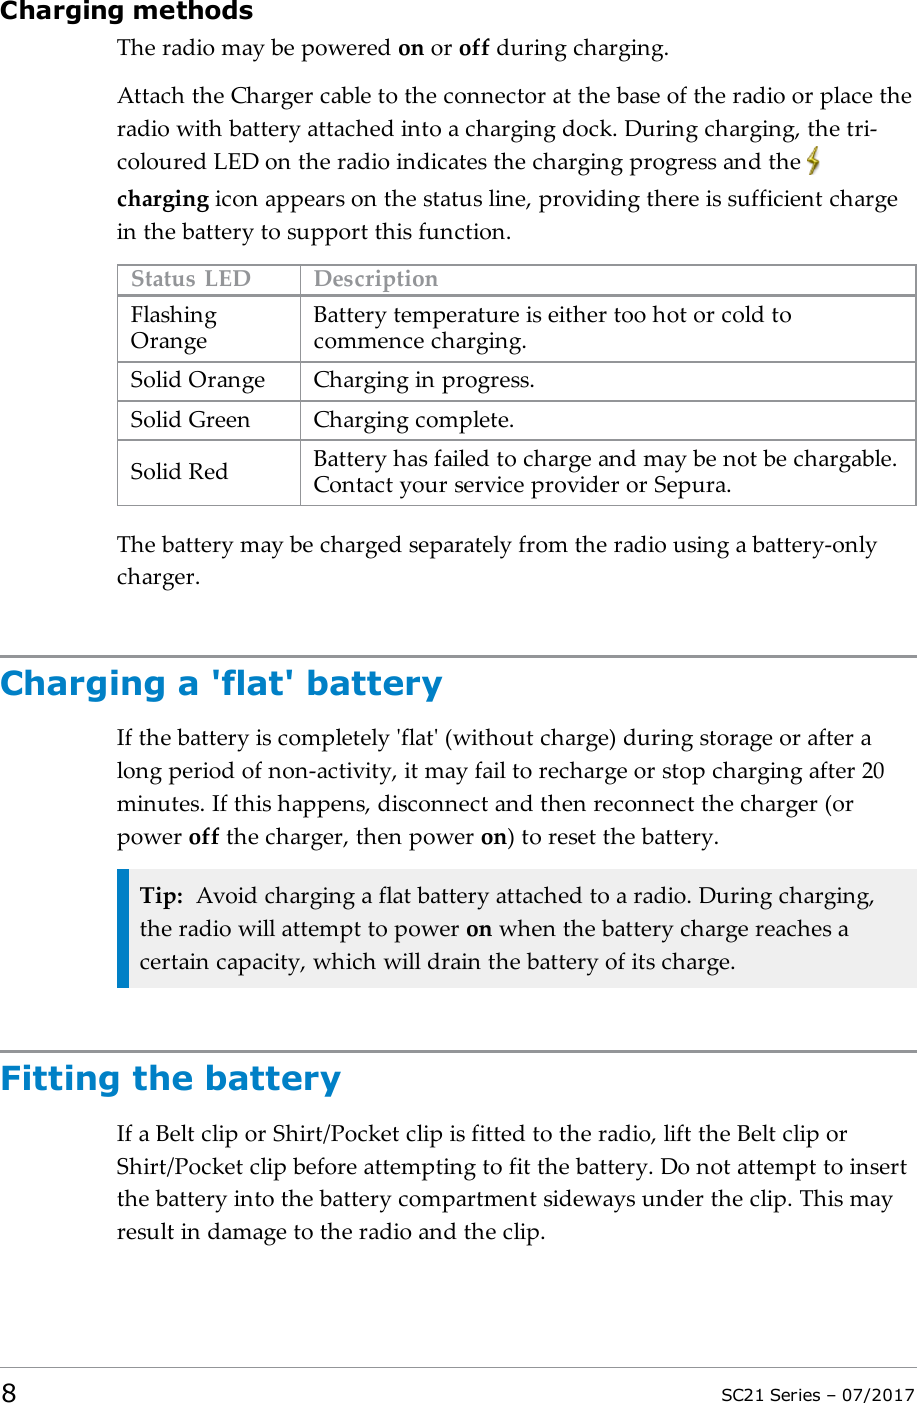 Charging methodsThe radio may be powered on or off during charging.Attach the Charger cable to the connector at the base of the radio or place theradio with battery attached into a charging dock. During charging, the tri-coloured LED on the radio indicates the charging progress and thecharging icon appears on the status line, providing there is sufficient chargein the battery to support this function.Status LED DescriptionFlashingOrangeBattery temperature is either too hot or cold tocommence charging.Solid Orange Charging in progress.Solid Green Charging complete.Solid Red Battery has failed to charge and may be not be chargable.Contact your service provider or Sepura.The battery may be charged separately from the radio using a battery-onlycharger.Charging a &apos;flat&apos; batteryIf the battery is completely &apos;flat&apos; (without charge) during storage or after along period of non-activity, it may fail to recharge or stop charging after 20minutes. If this happens, disconnect and then reconnect the charger (orpower off the charger, then power on) to reset the battery.Tip: Avoid charging a flat battery attached to a radio. During charging,the radio will attempt to power on when the battery charge reaches acertain capacity, which will drain the battery of its charge.Fitting the batteryIf a Belt clip or Shirt/Pocket clip is fitted to the radio, lift the Belt clip orShirt/Pocket clip before attempting to fit the battery. Do not attempt to insertthe battery into the battery compartment sideways under the clip. This mayresult in damage to the radio and the clip.8SC21 Series – 07/2017